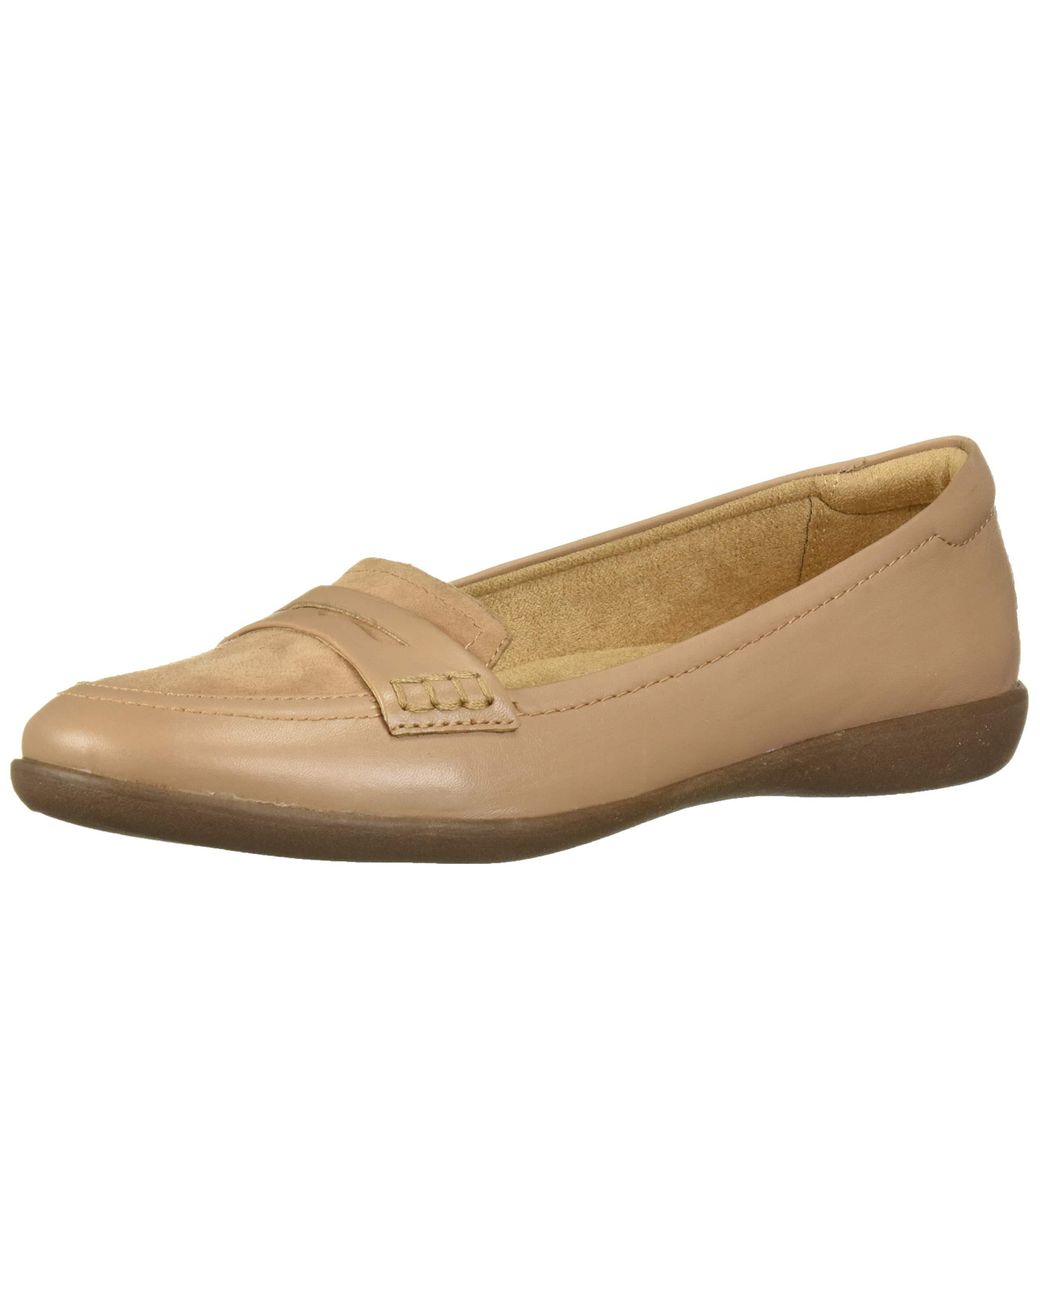 Naturalizer Womens Finley Loafer Flat 